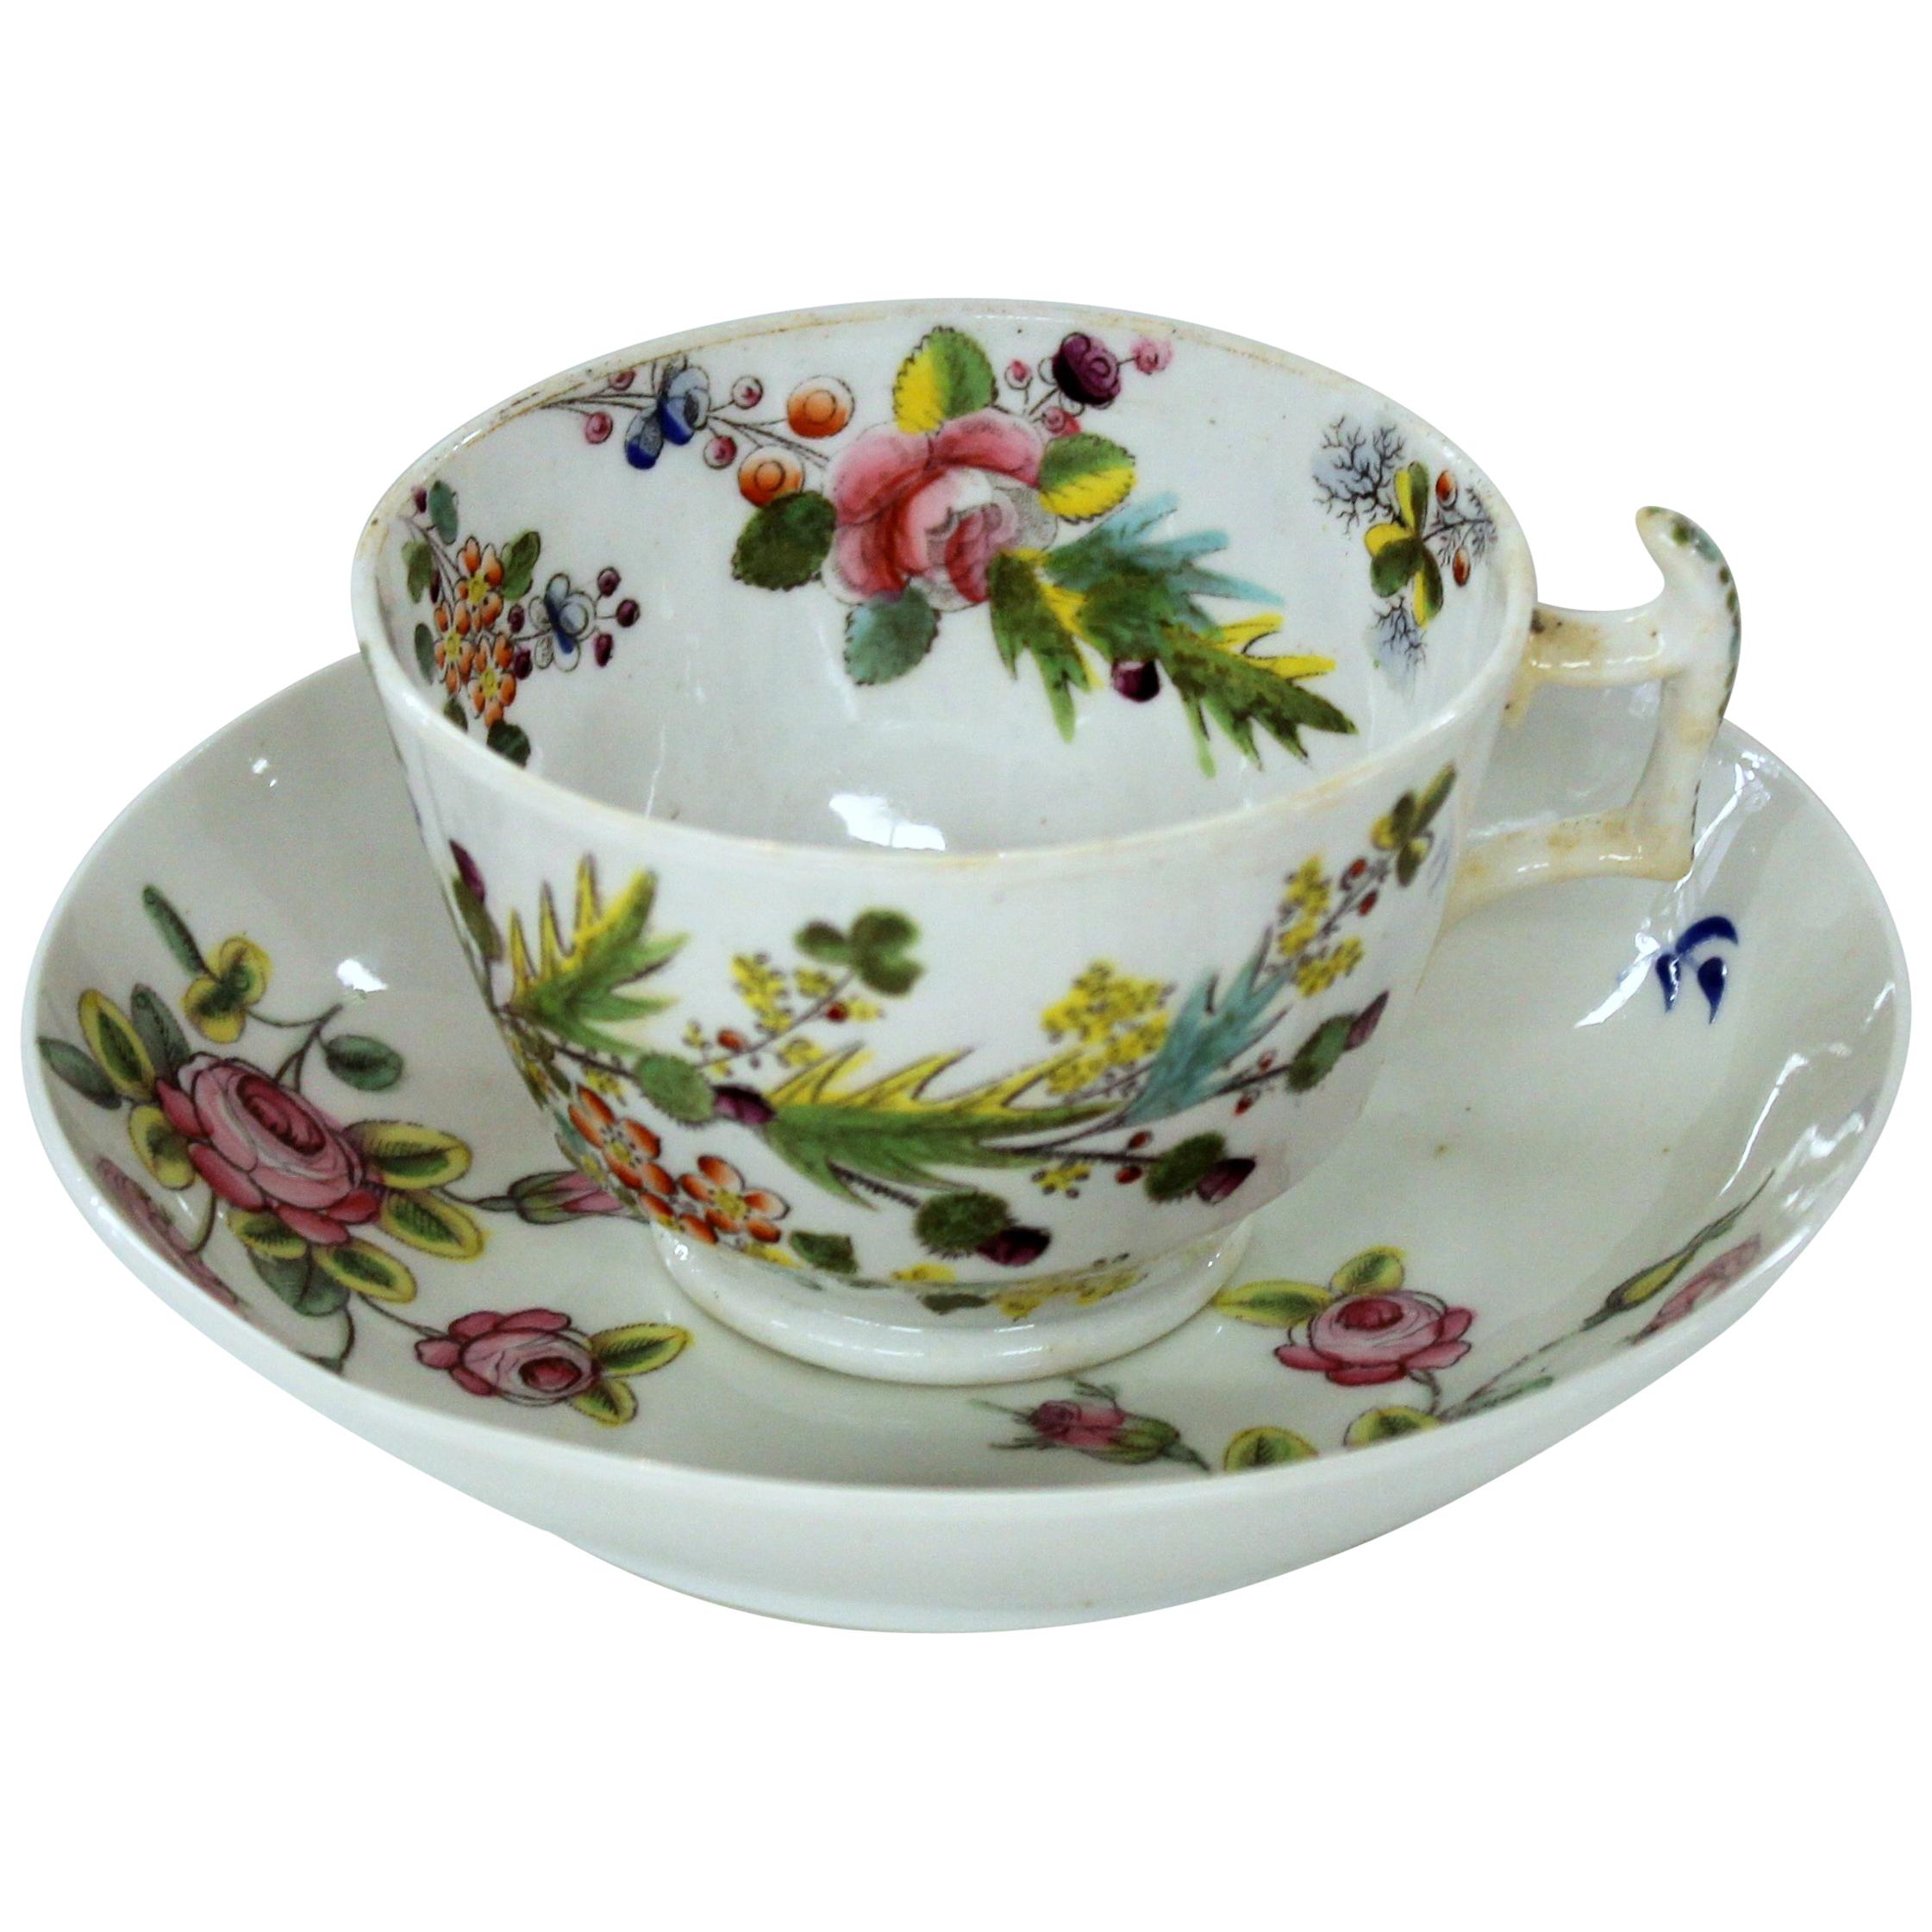 English Early 19th Century New Hall Porcelain Floral Decor Cup and Saucer For Sale